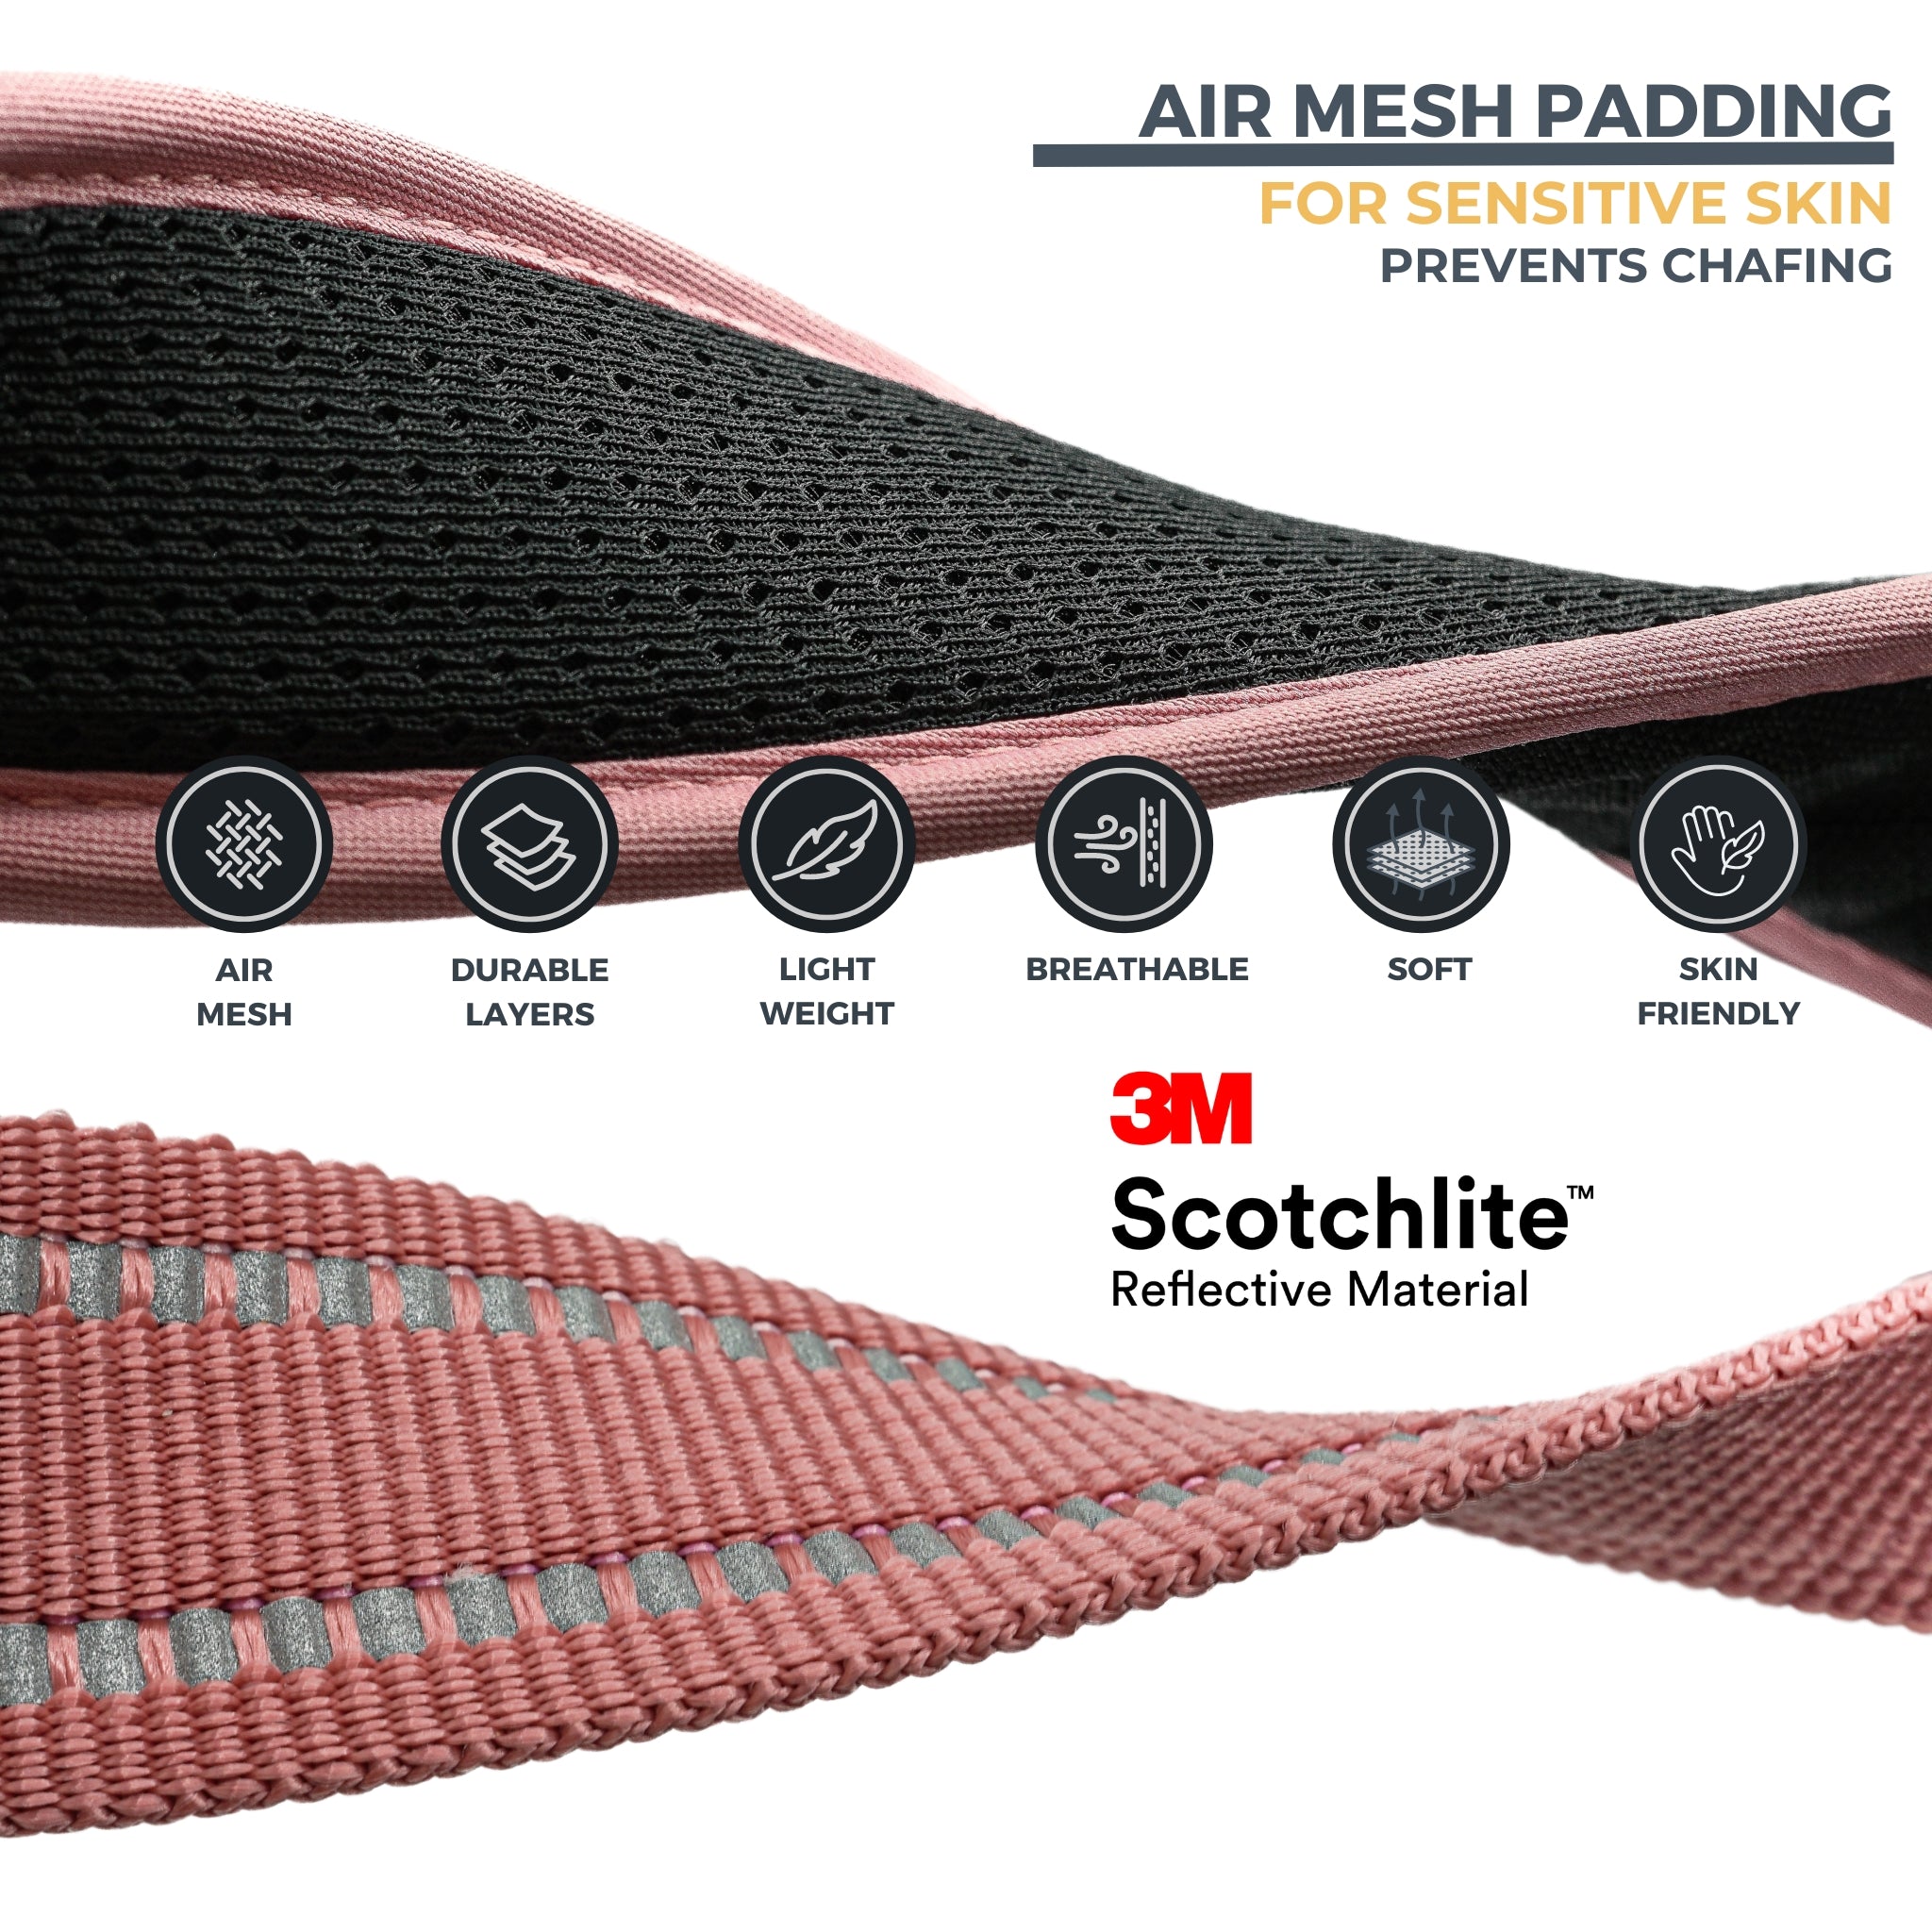 Pink Air Mesh collar close up details regarding Air Mesh padding with 6 icons showing benefits: Air Mesh; durable layers; light weight; breathable; soft; skin friendly. For sensitive skin, and prevents chafing. Close up details regarding 3M reflective stitching.